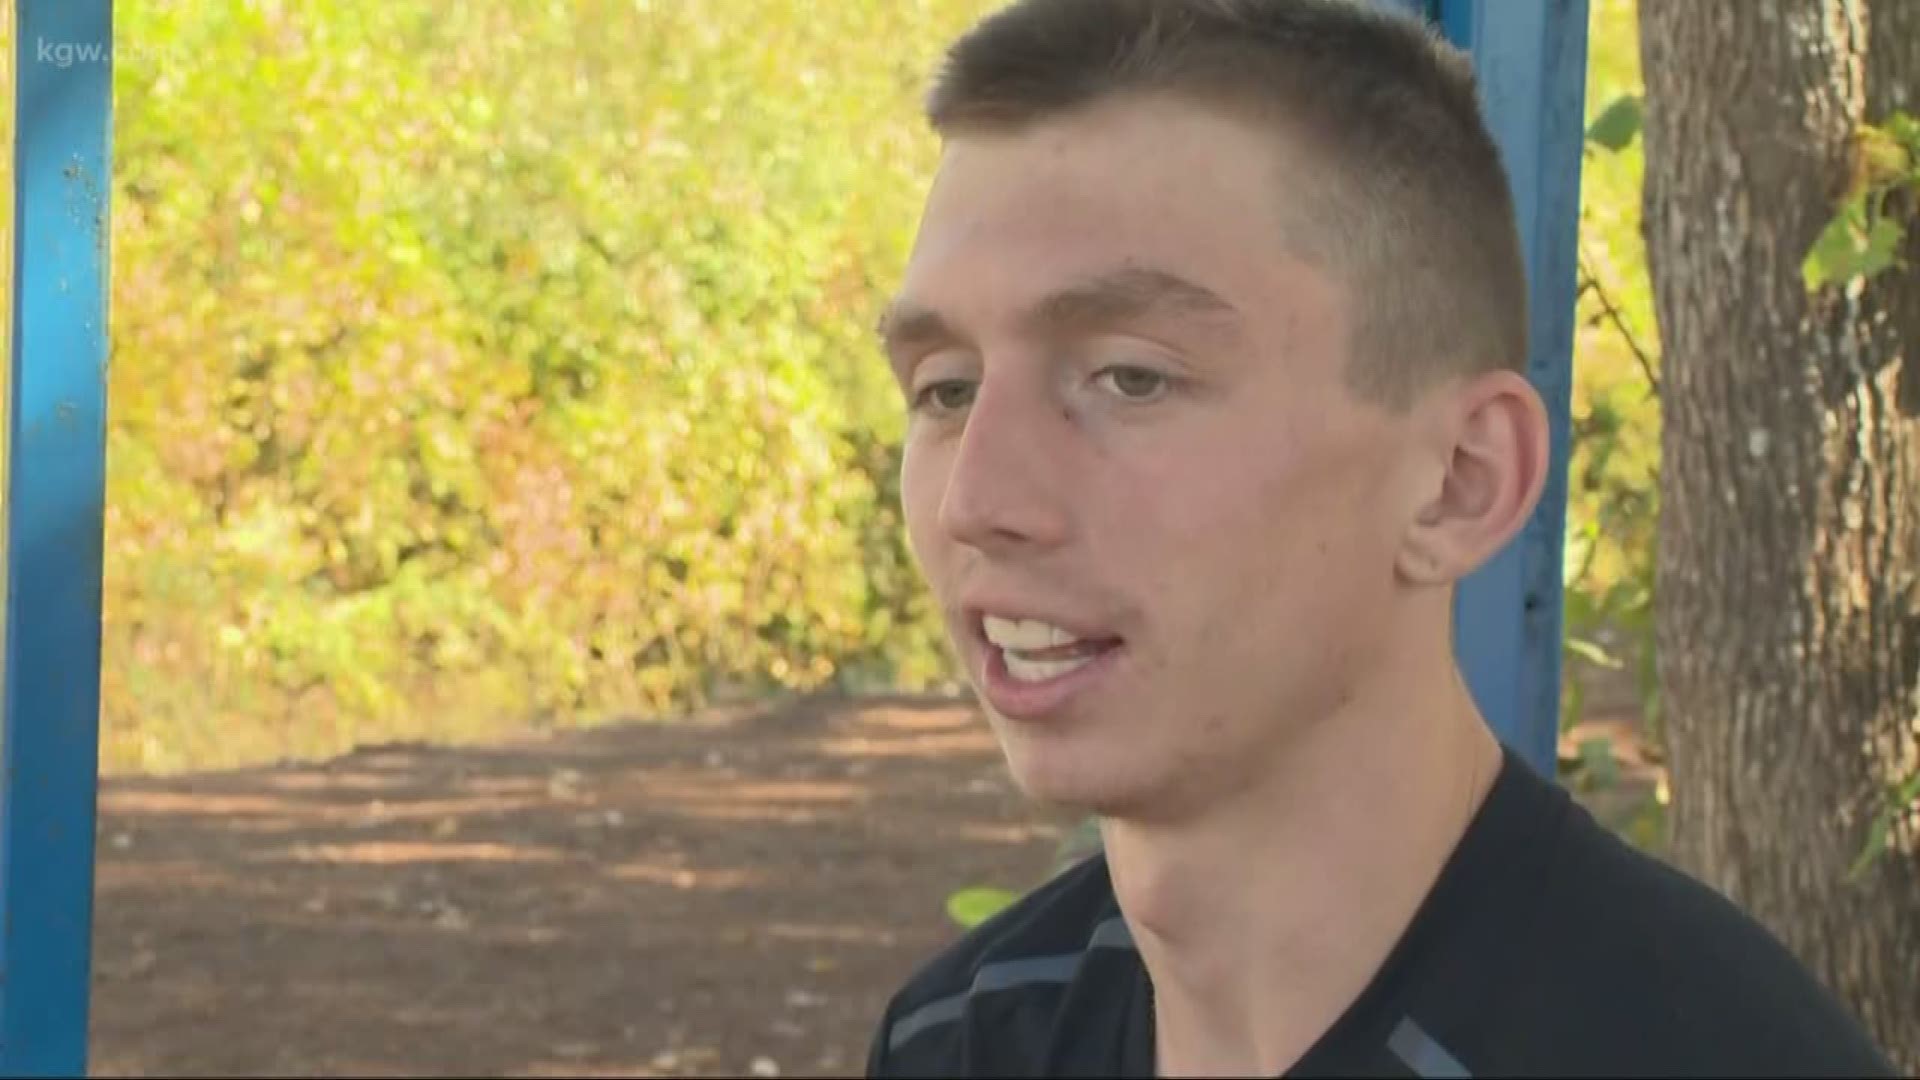 An Oregon runner with cerebral palsy just got a Nike contract.